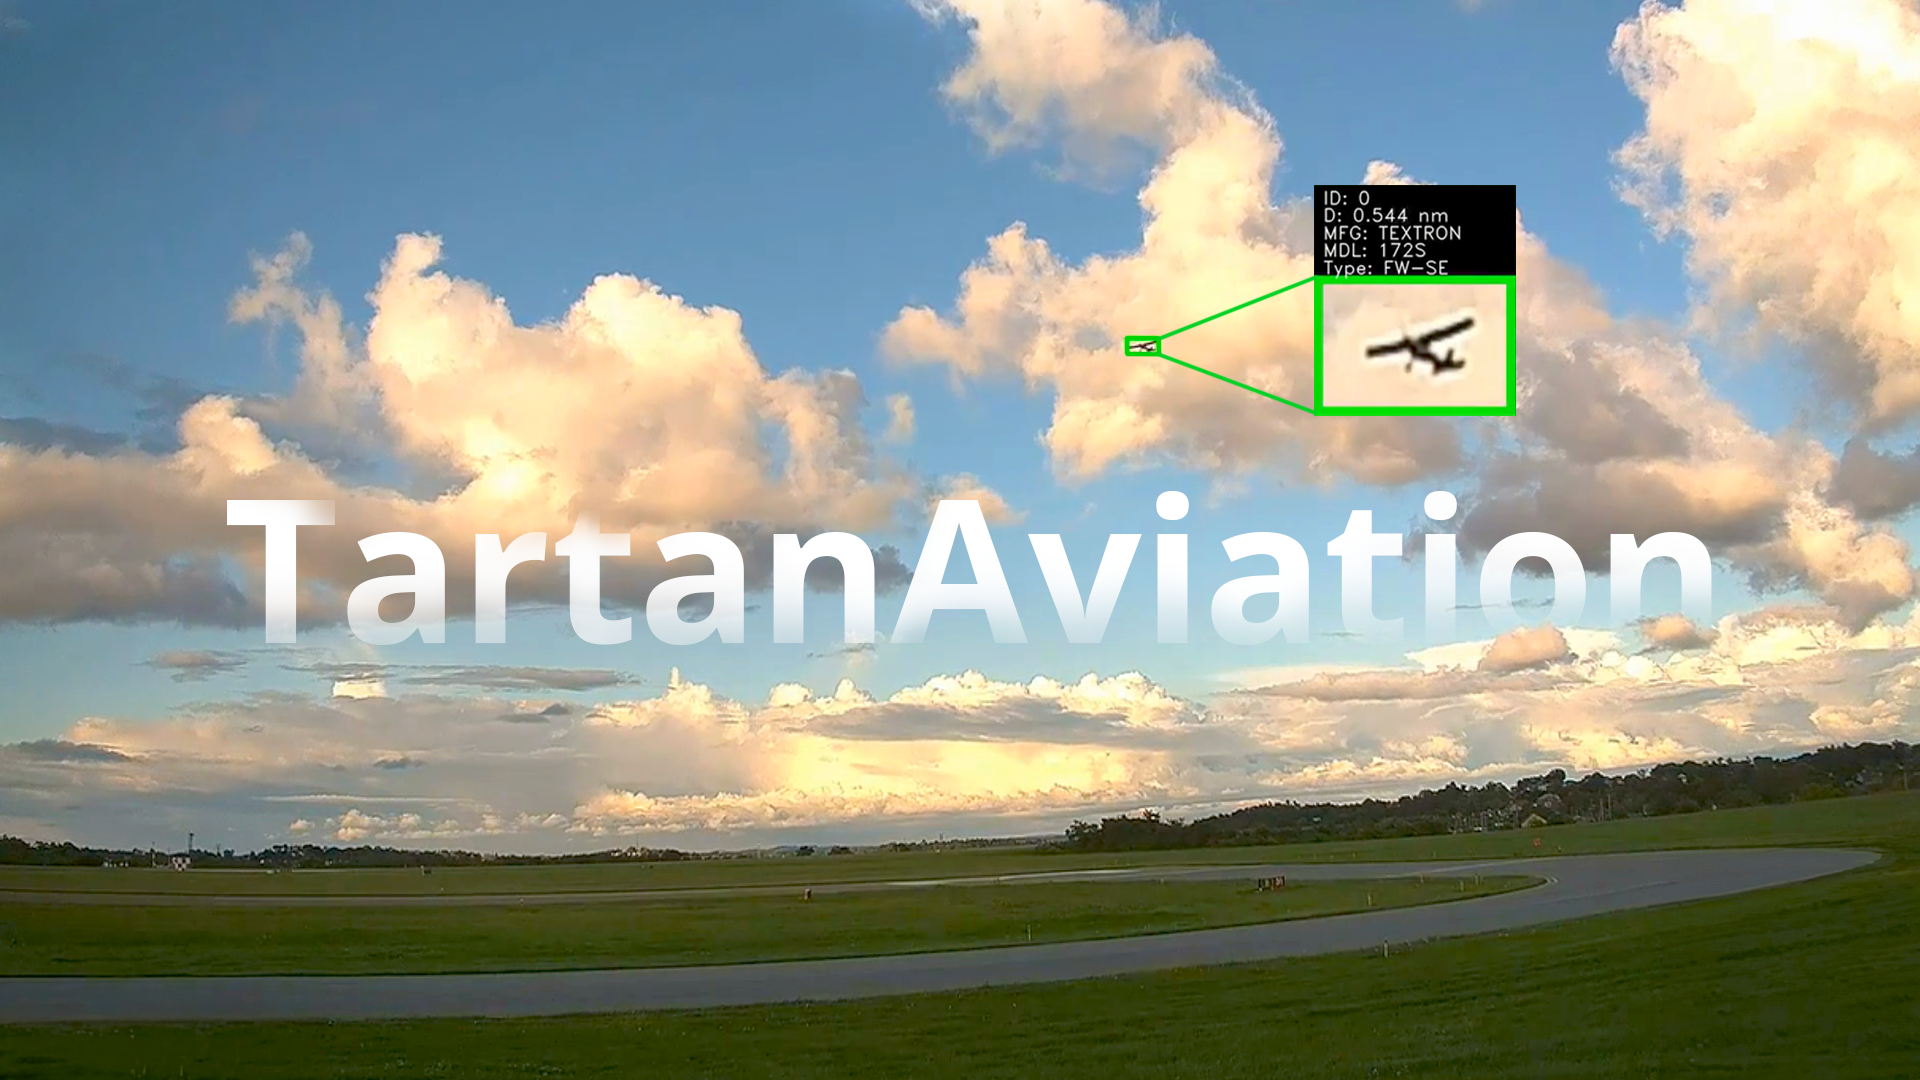 TartanAviation: Image, Speech, and Trajectory Datasets for Terminal Airspace Operations